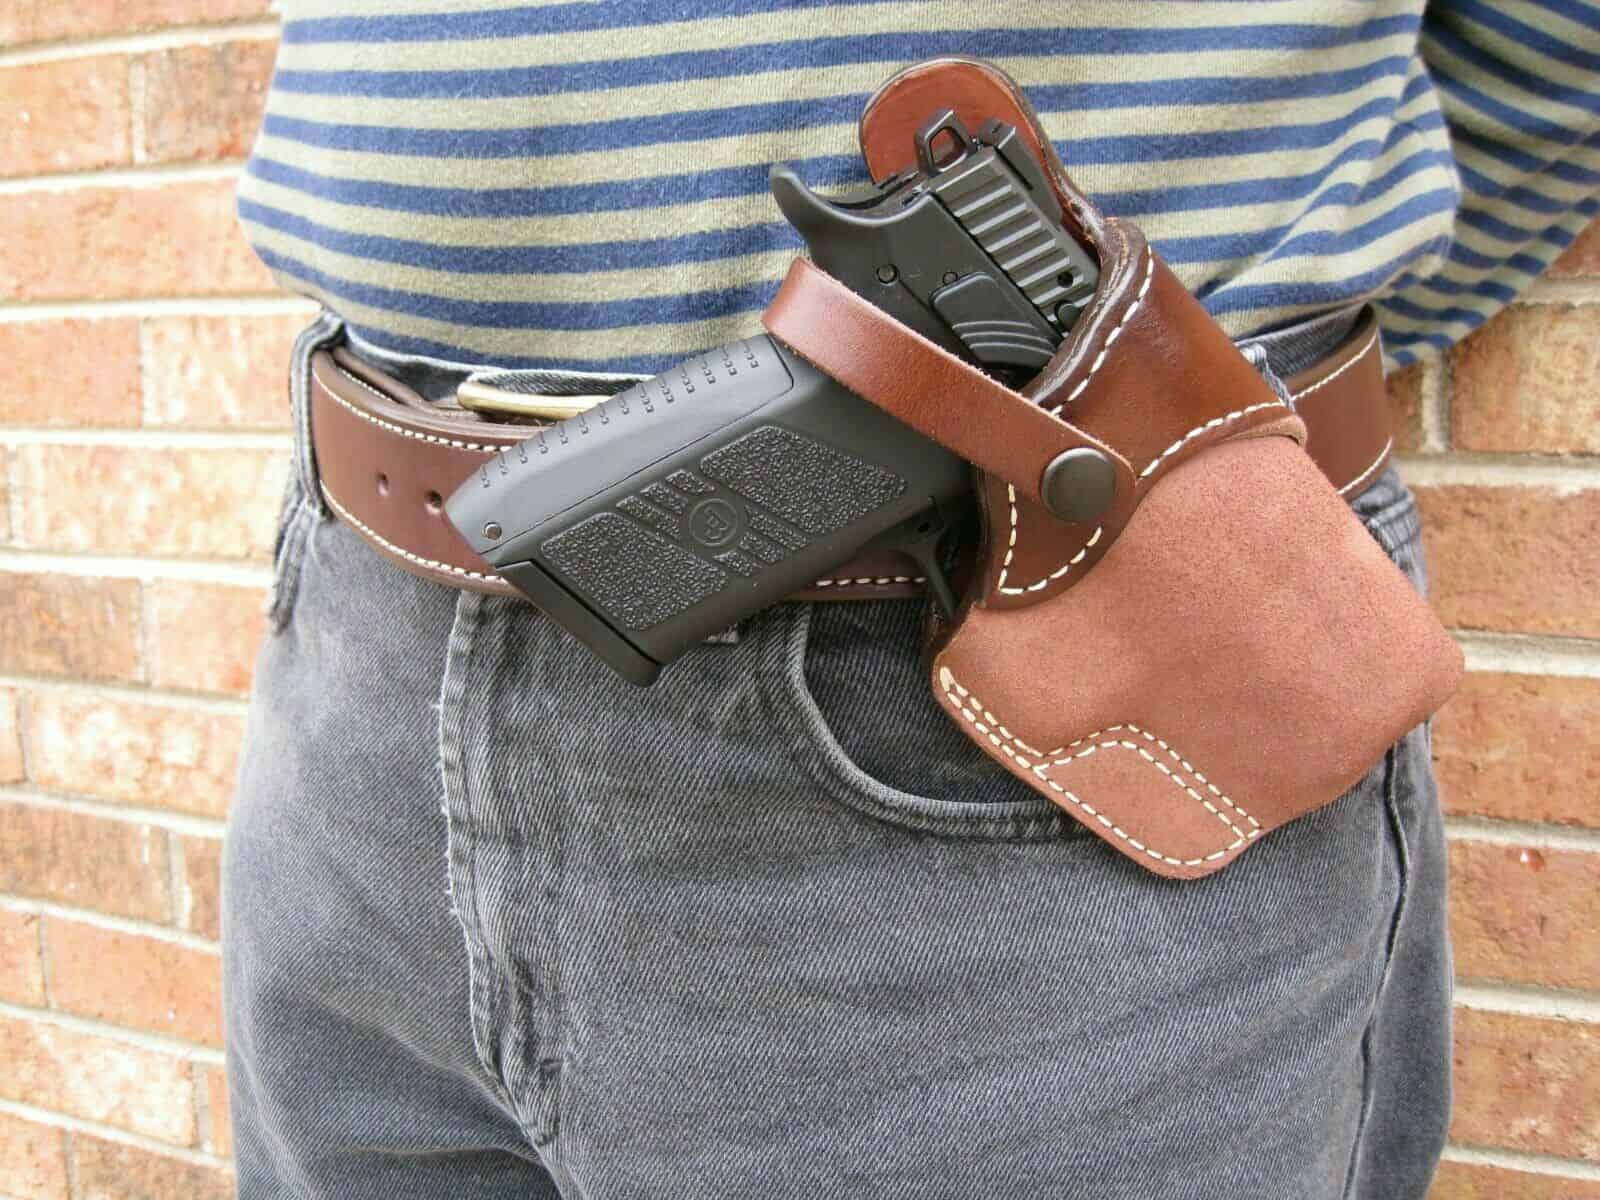 1. Introduction to Cross-Draw Carry and Holsters